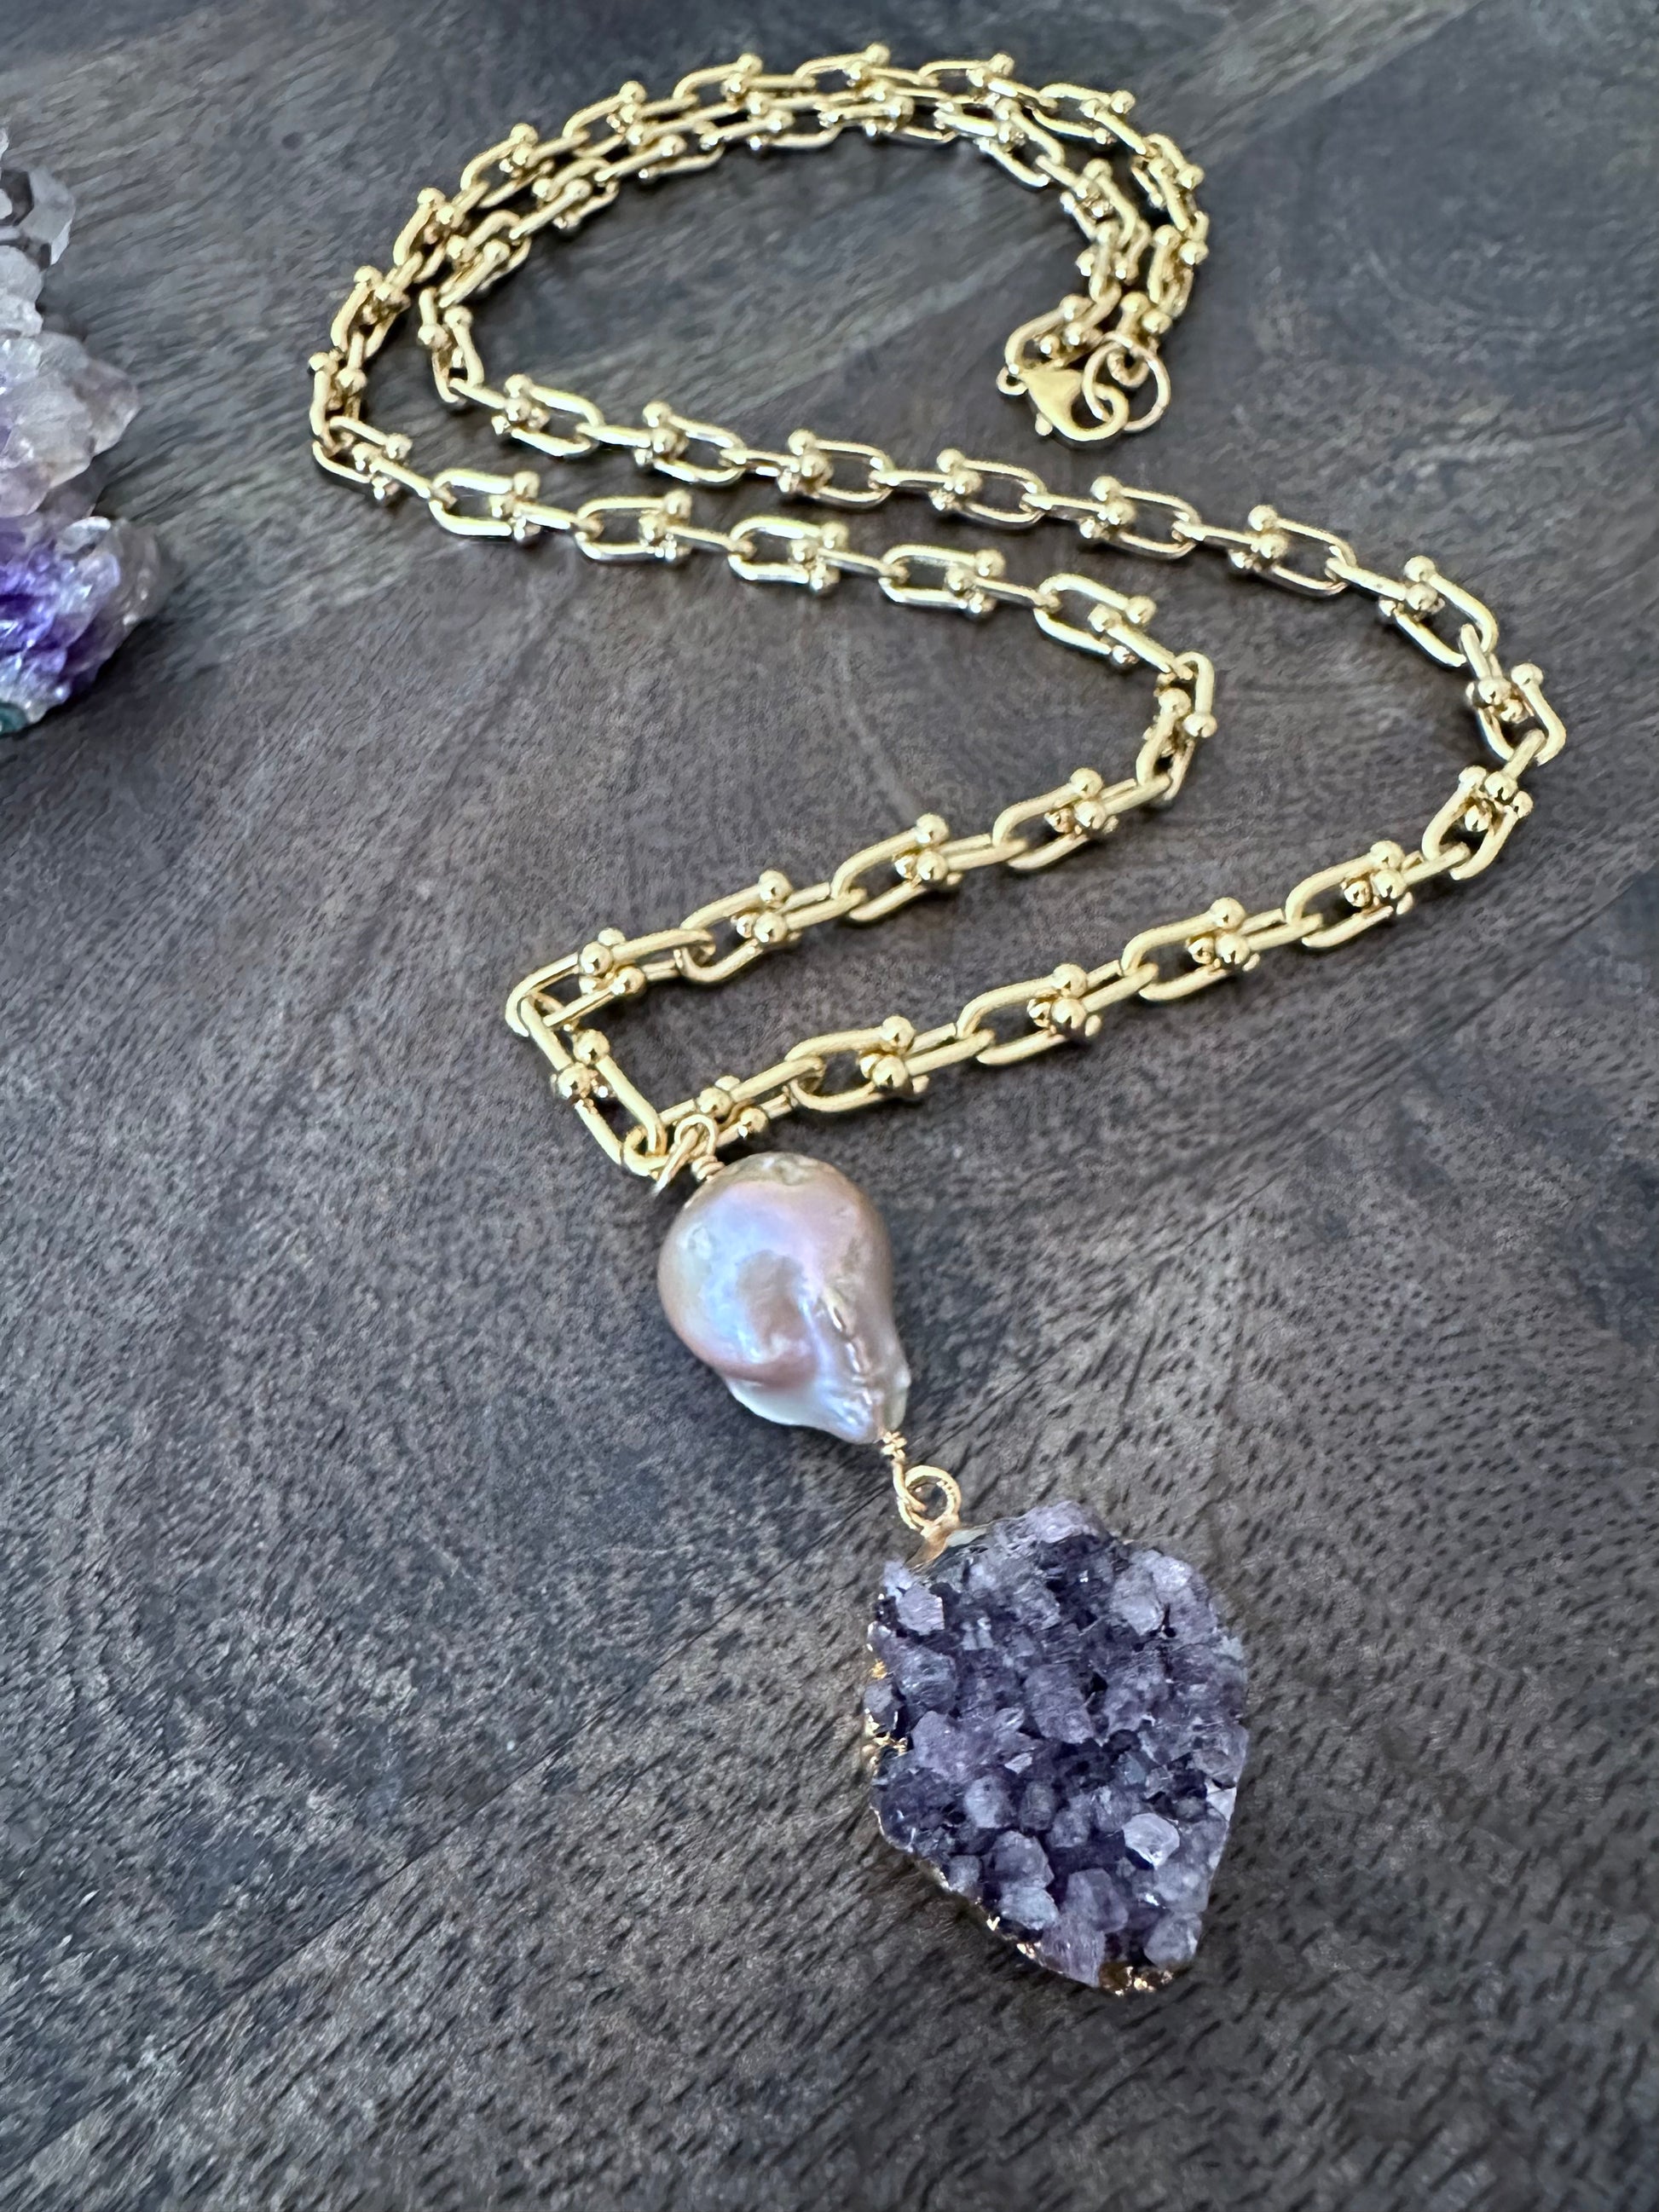 Large pink fireball shaped pearl woth a purple druzy pendant on a coiled gold chain on a wooden background